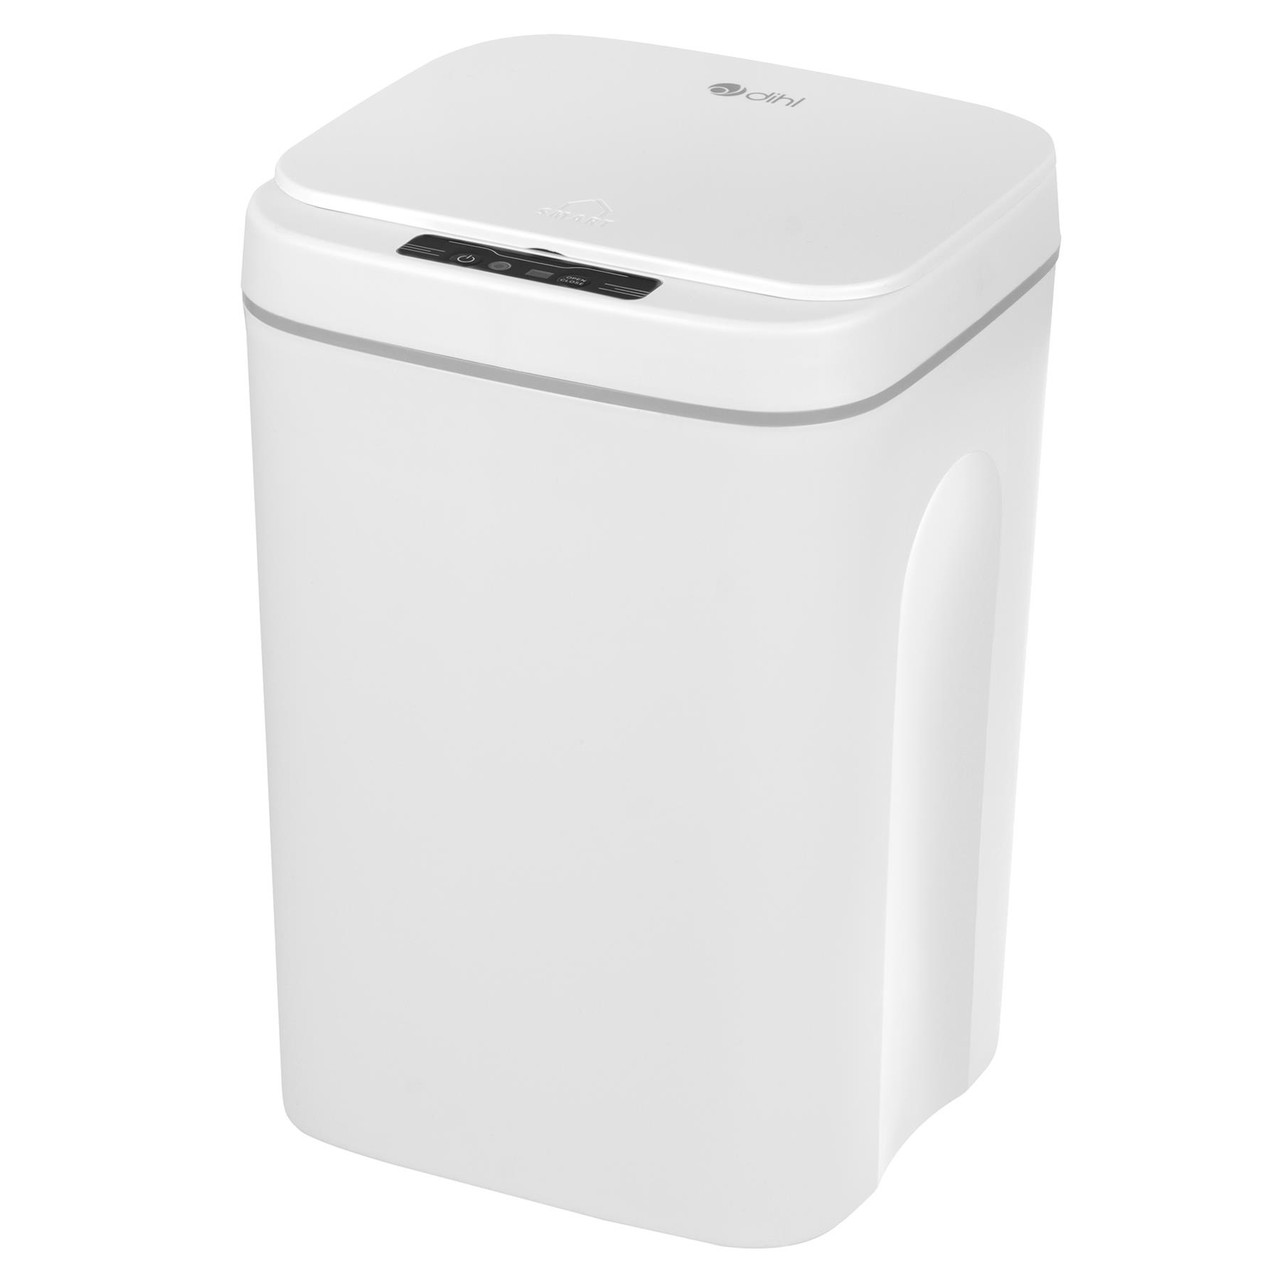 This mini trash can from  has a motion sensor for opening